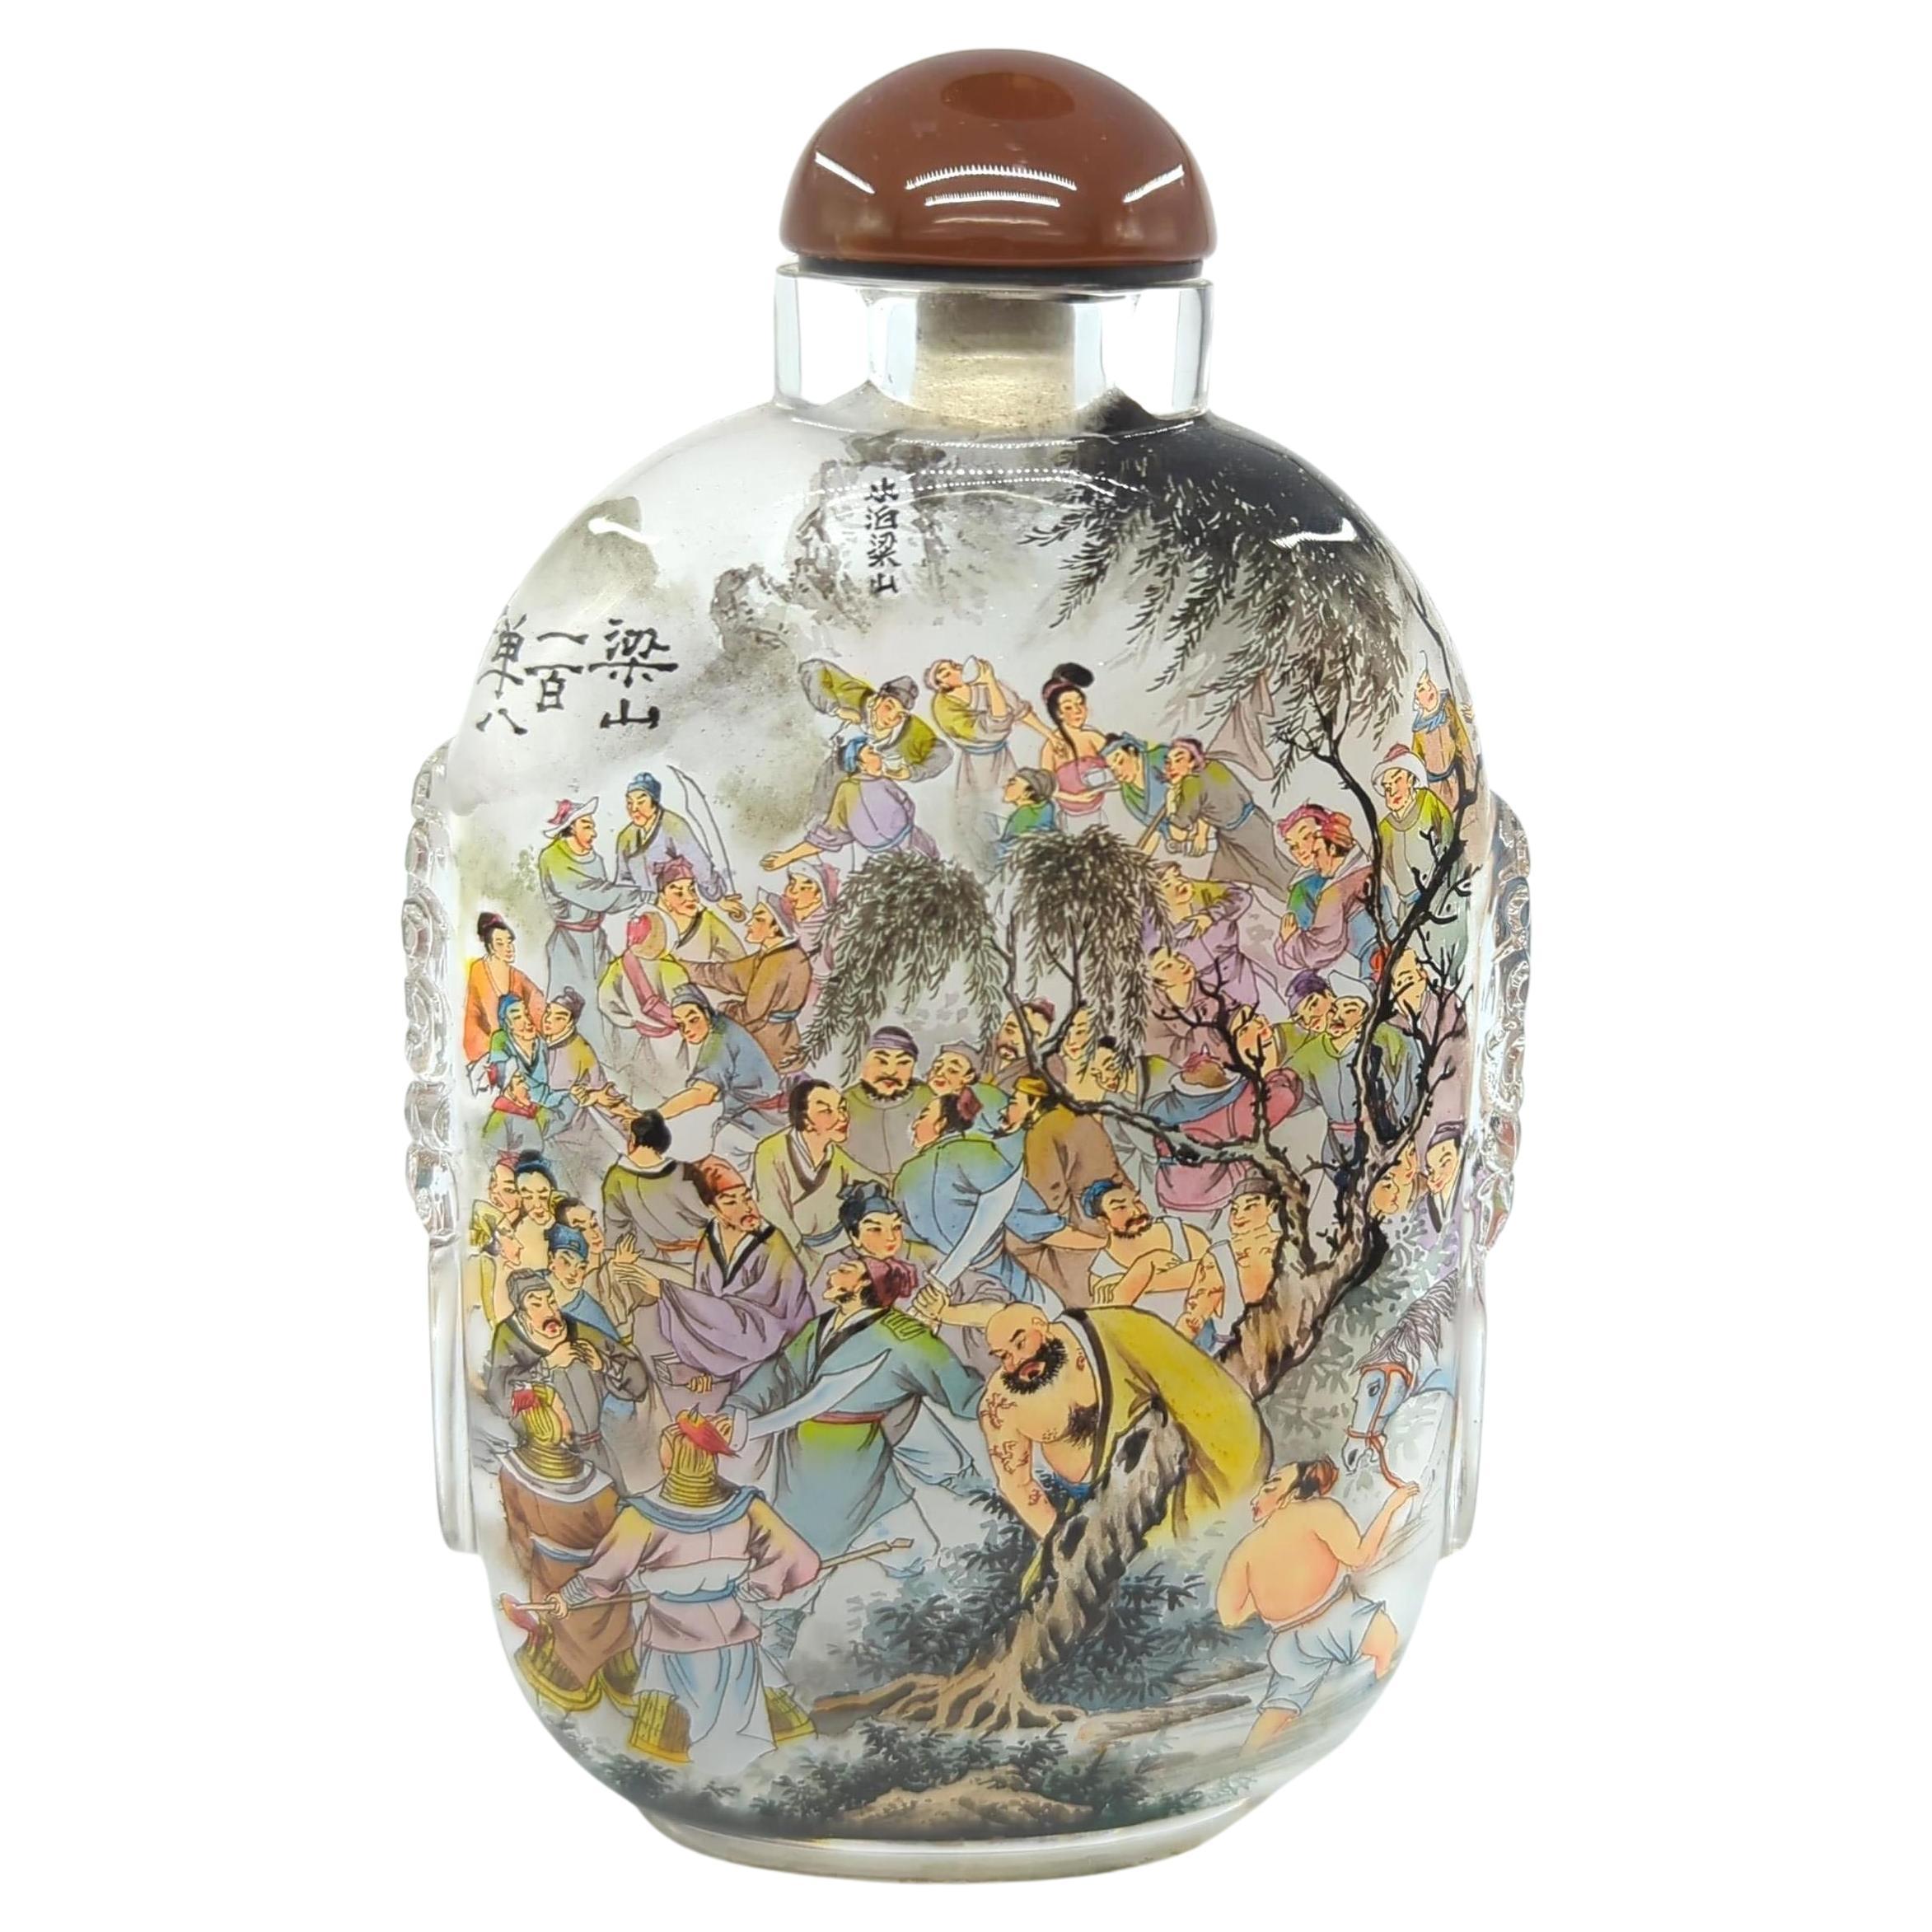 This remarkable glass snuff bottle, crafted by the esteemed artist Ya Qing in the spring of 2009, is a masterful example of inside painting. The bottle showcases an intricate depiction of the 108 warrior figures from Liang Mountain, as immortalized